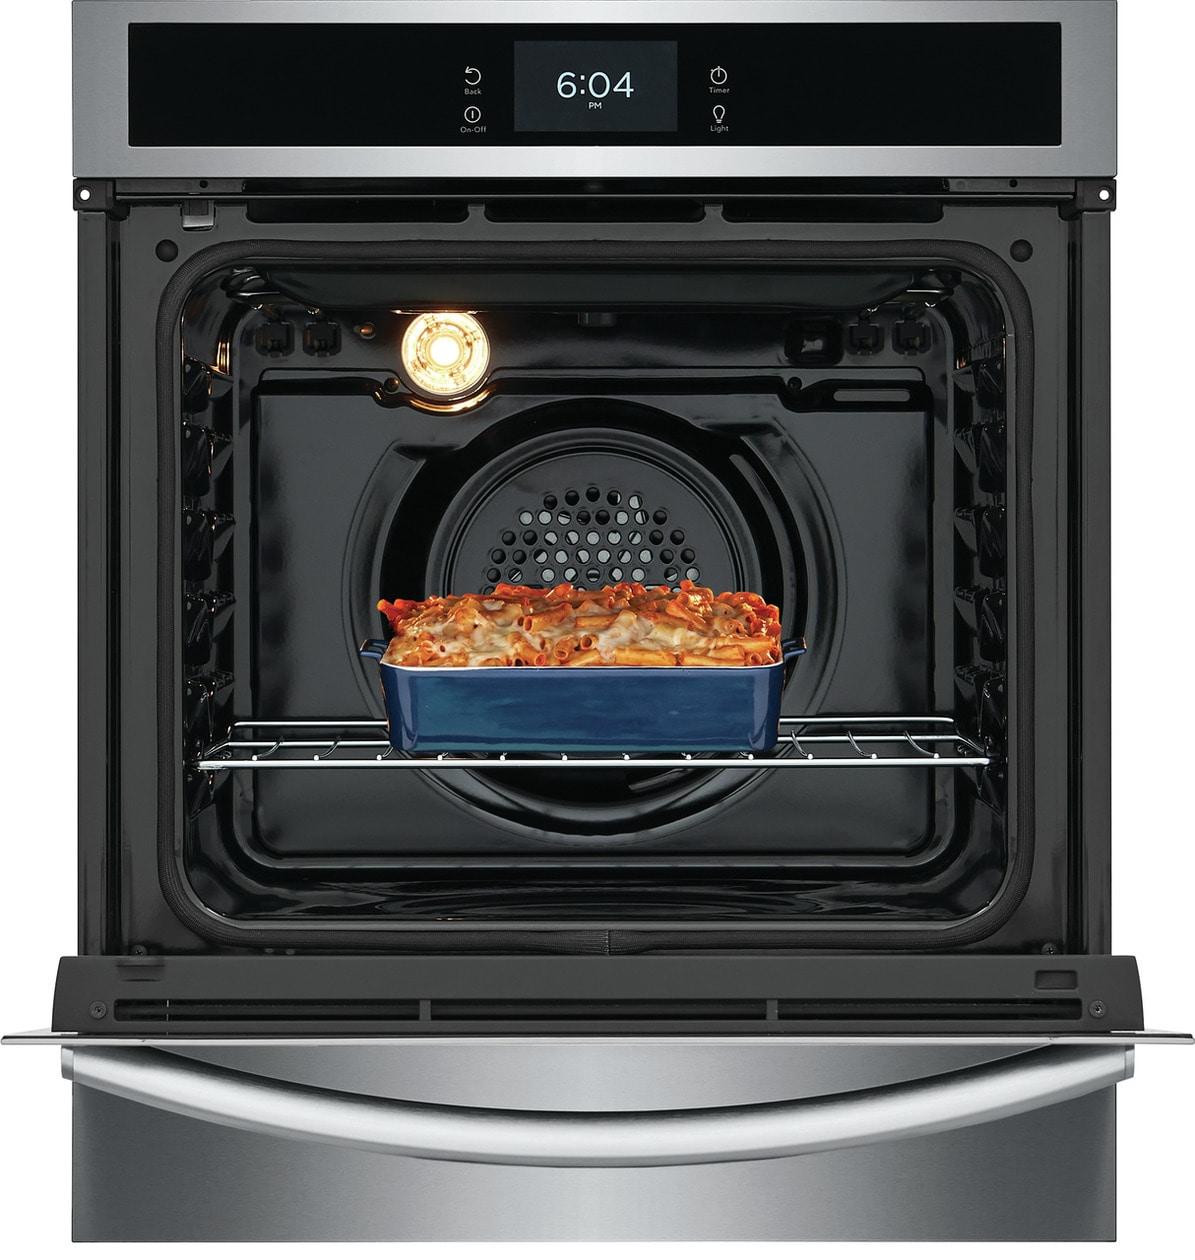 Frigidaire GCWS2438AF Frigidaire Gallery 24" Single Electric Wall Oven With Air Fry